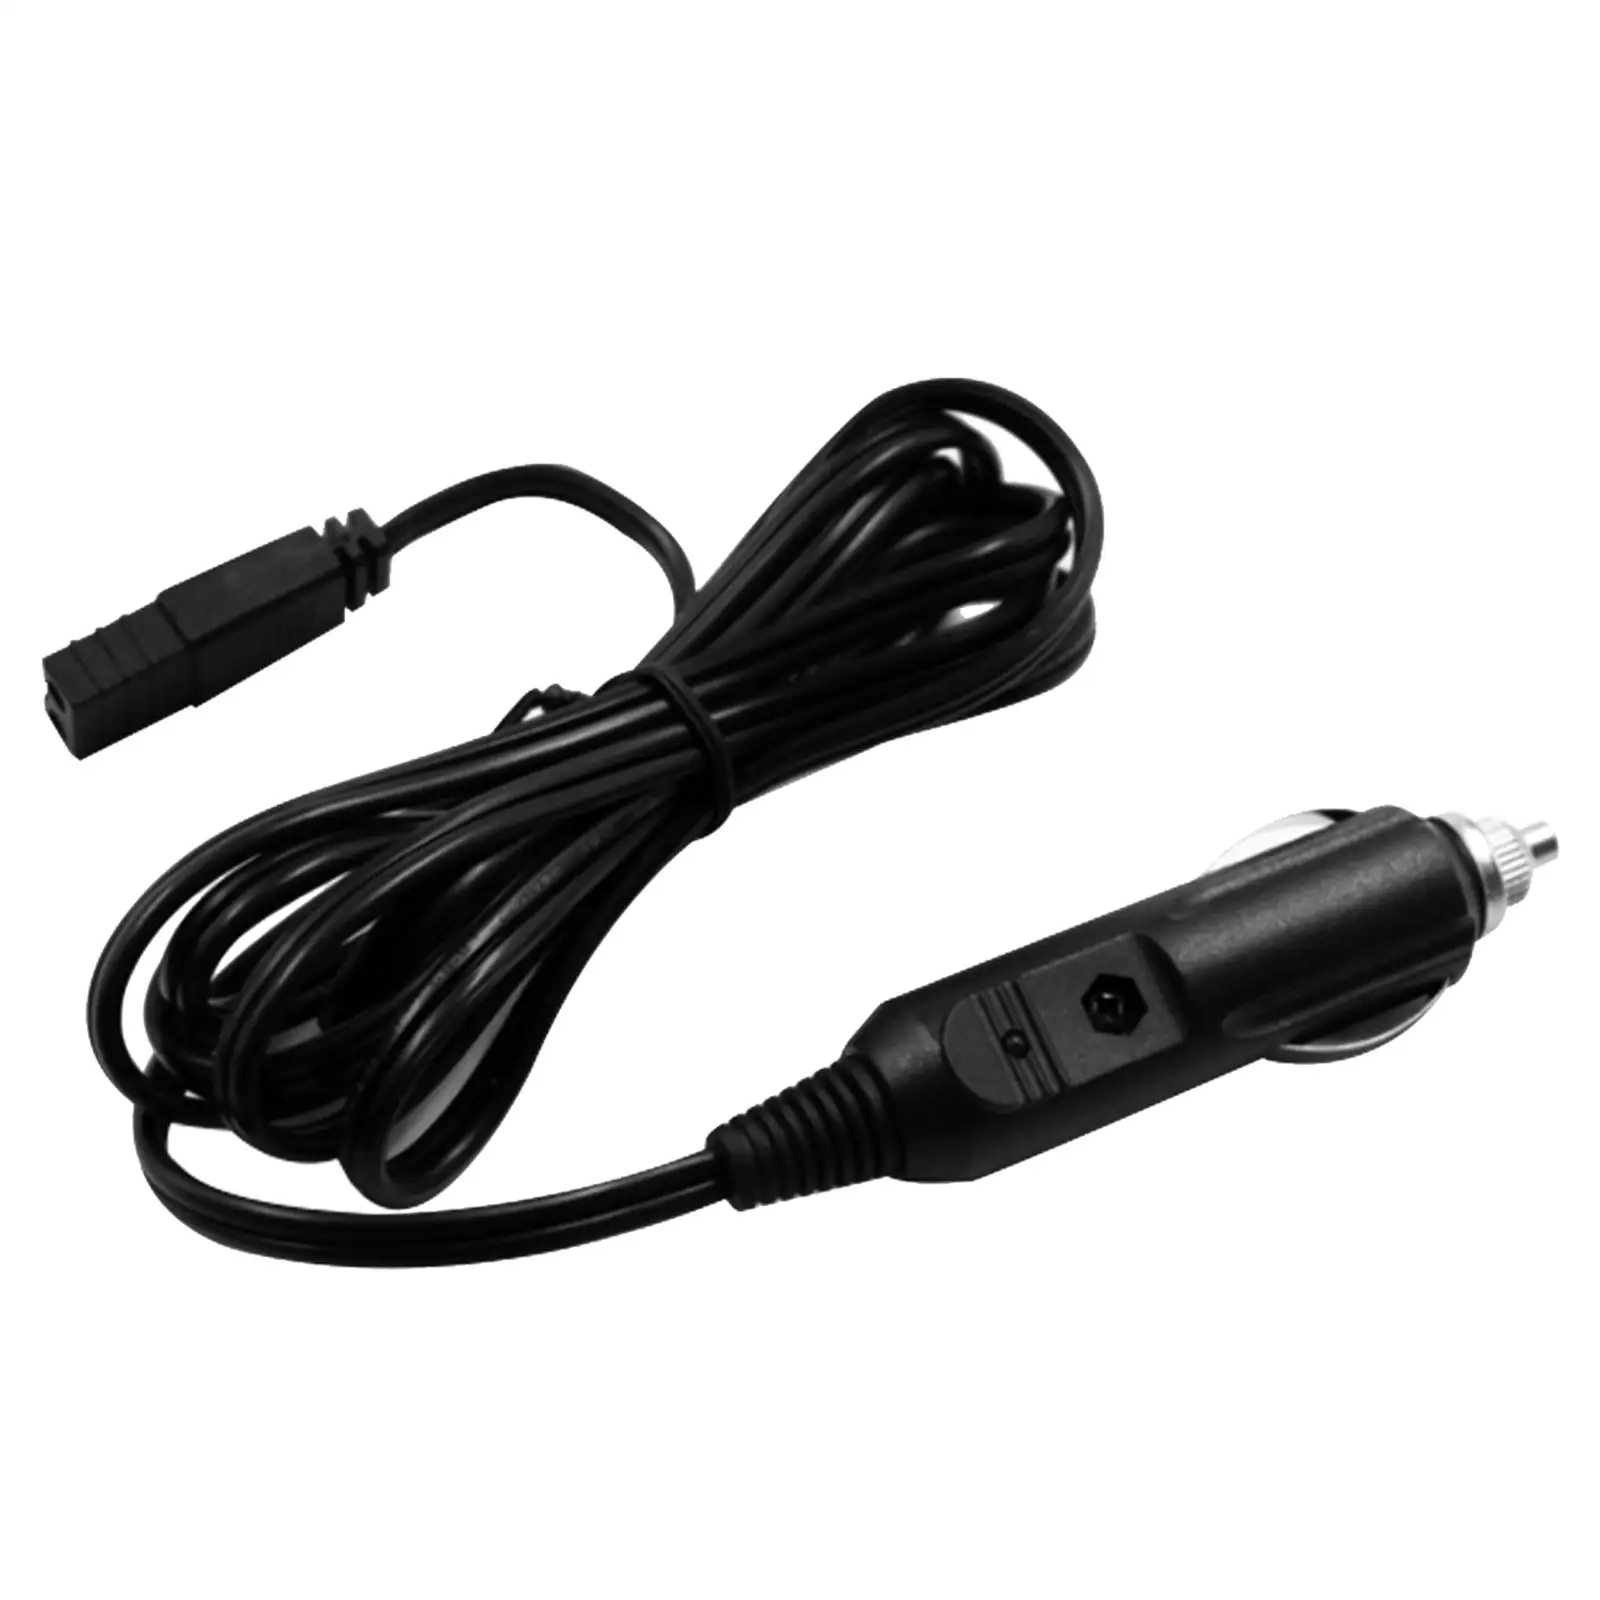 63inch Power Cable Cord 12-24V for Car Fridge Freezer Exquisite Design Widely Used Space Saving Black Simple Installation